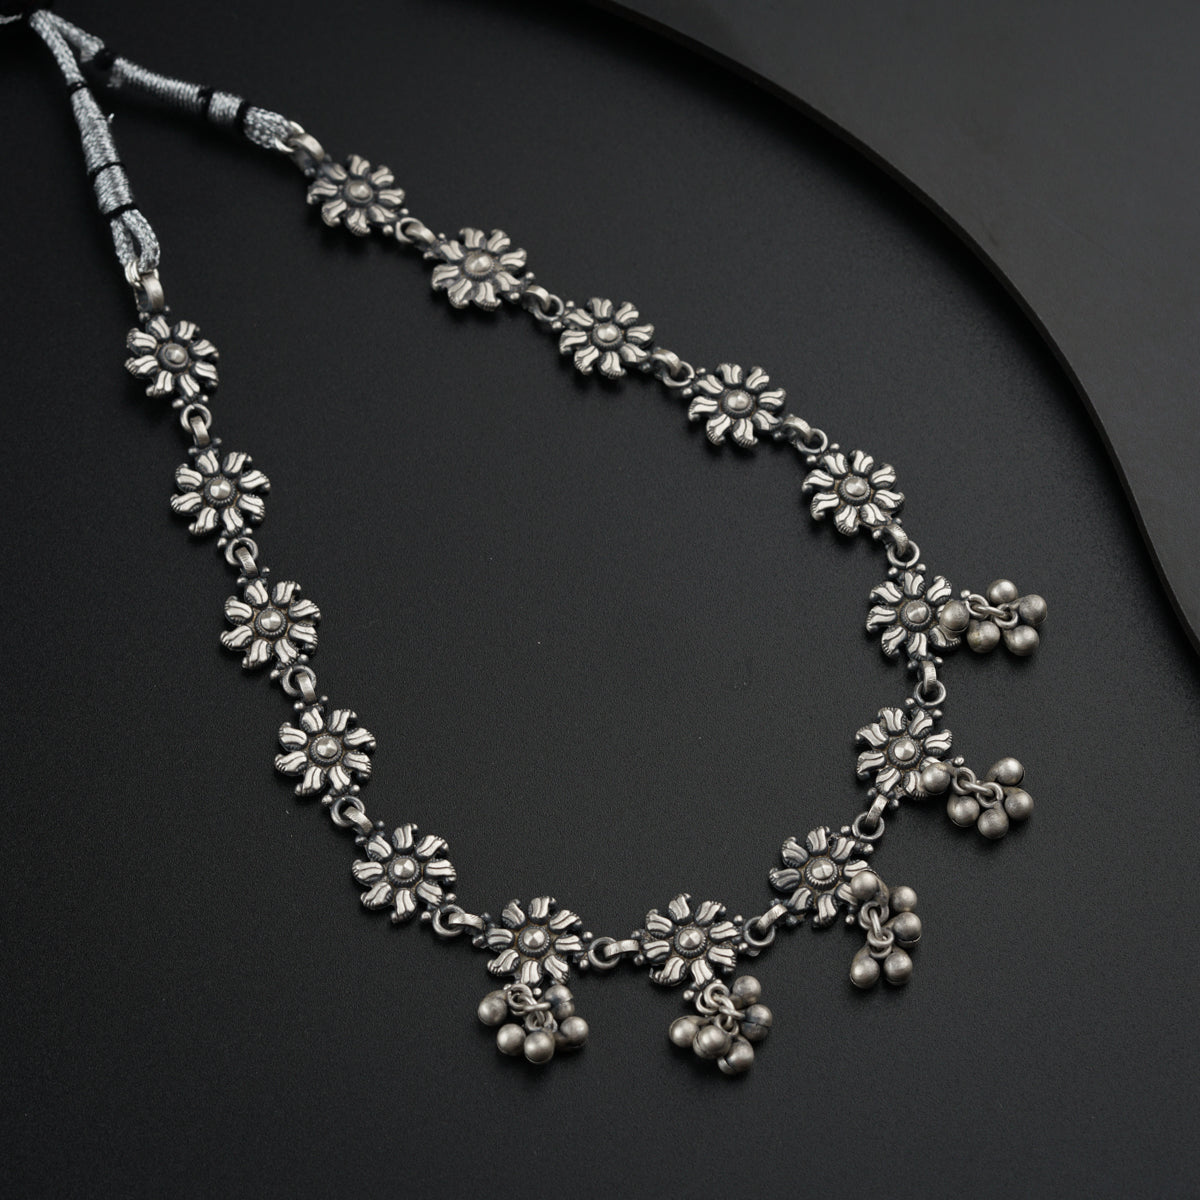 a necklace with flowers on a black surface